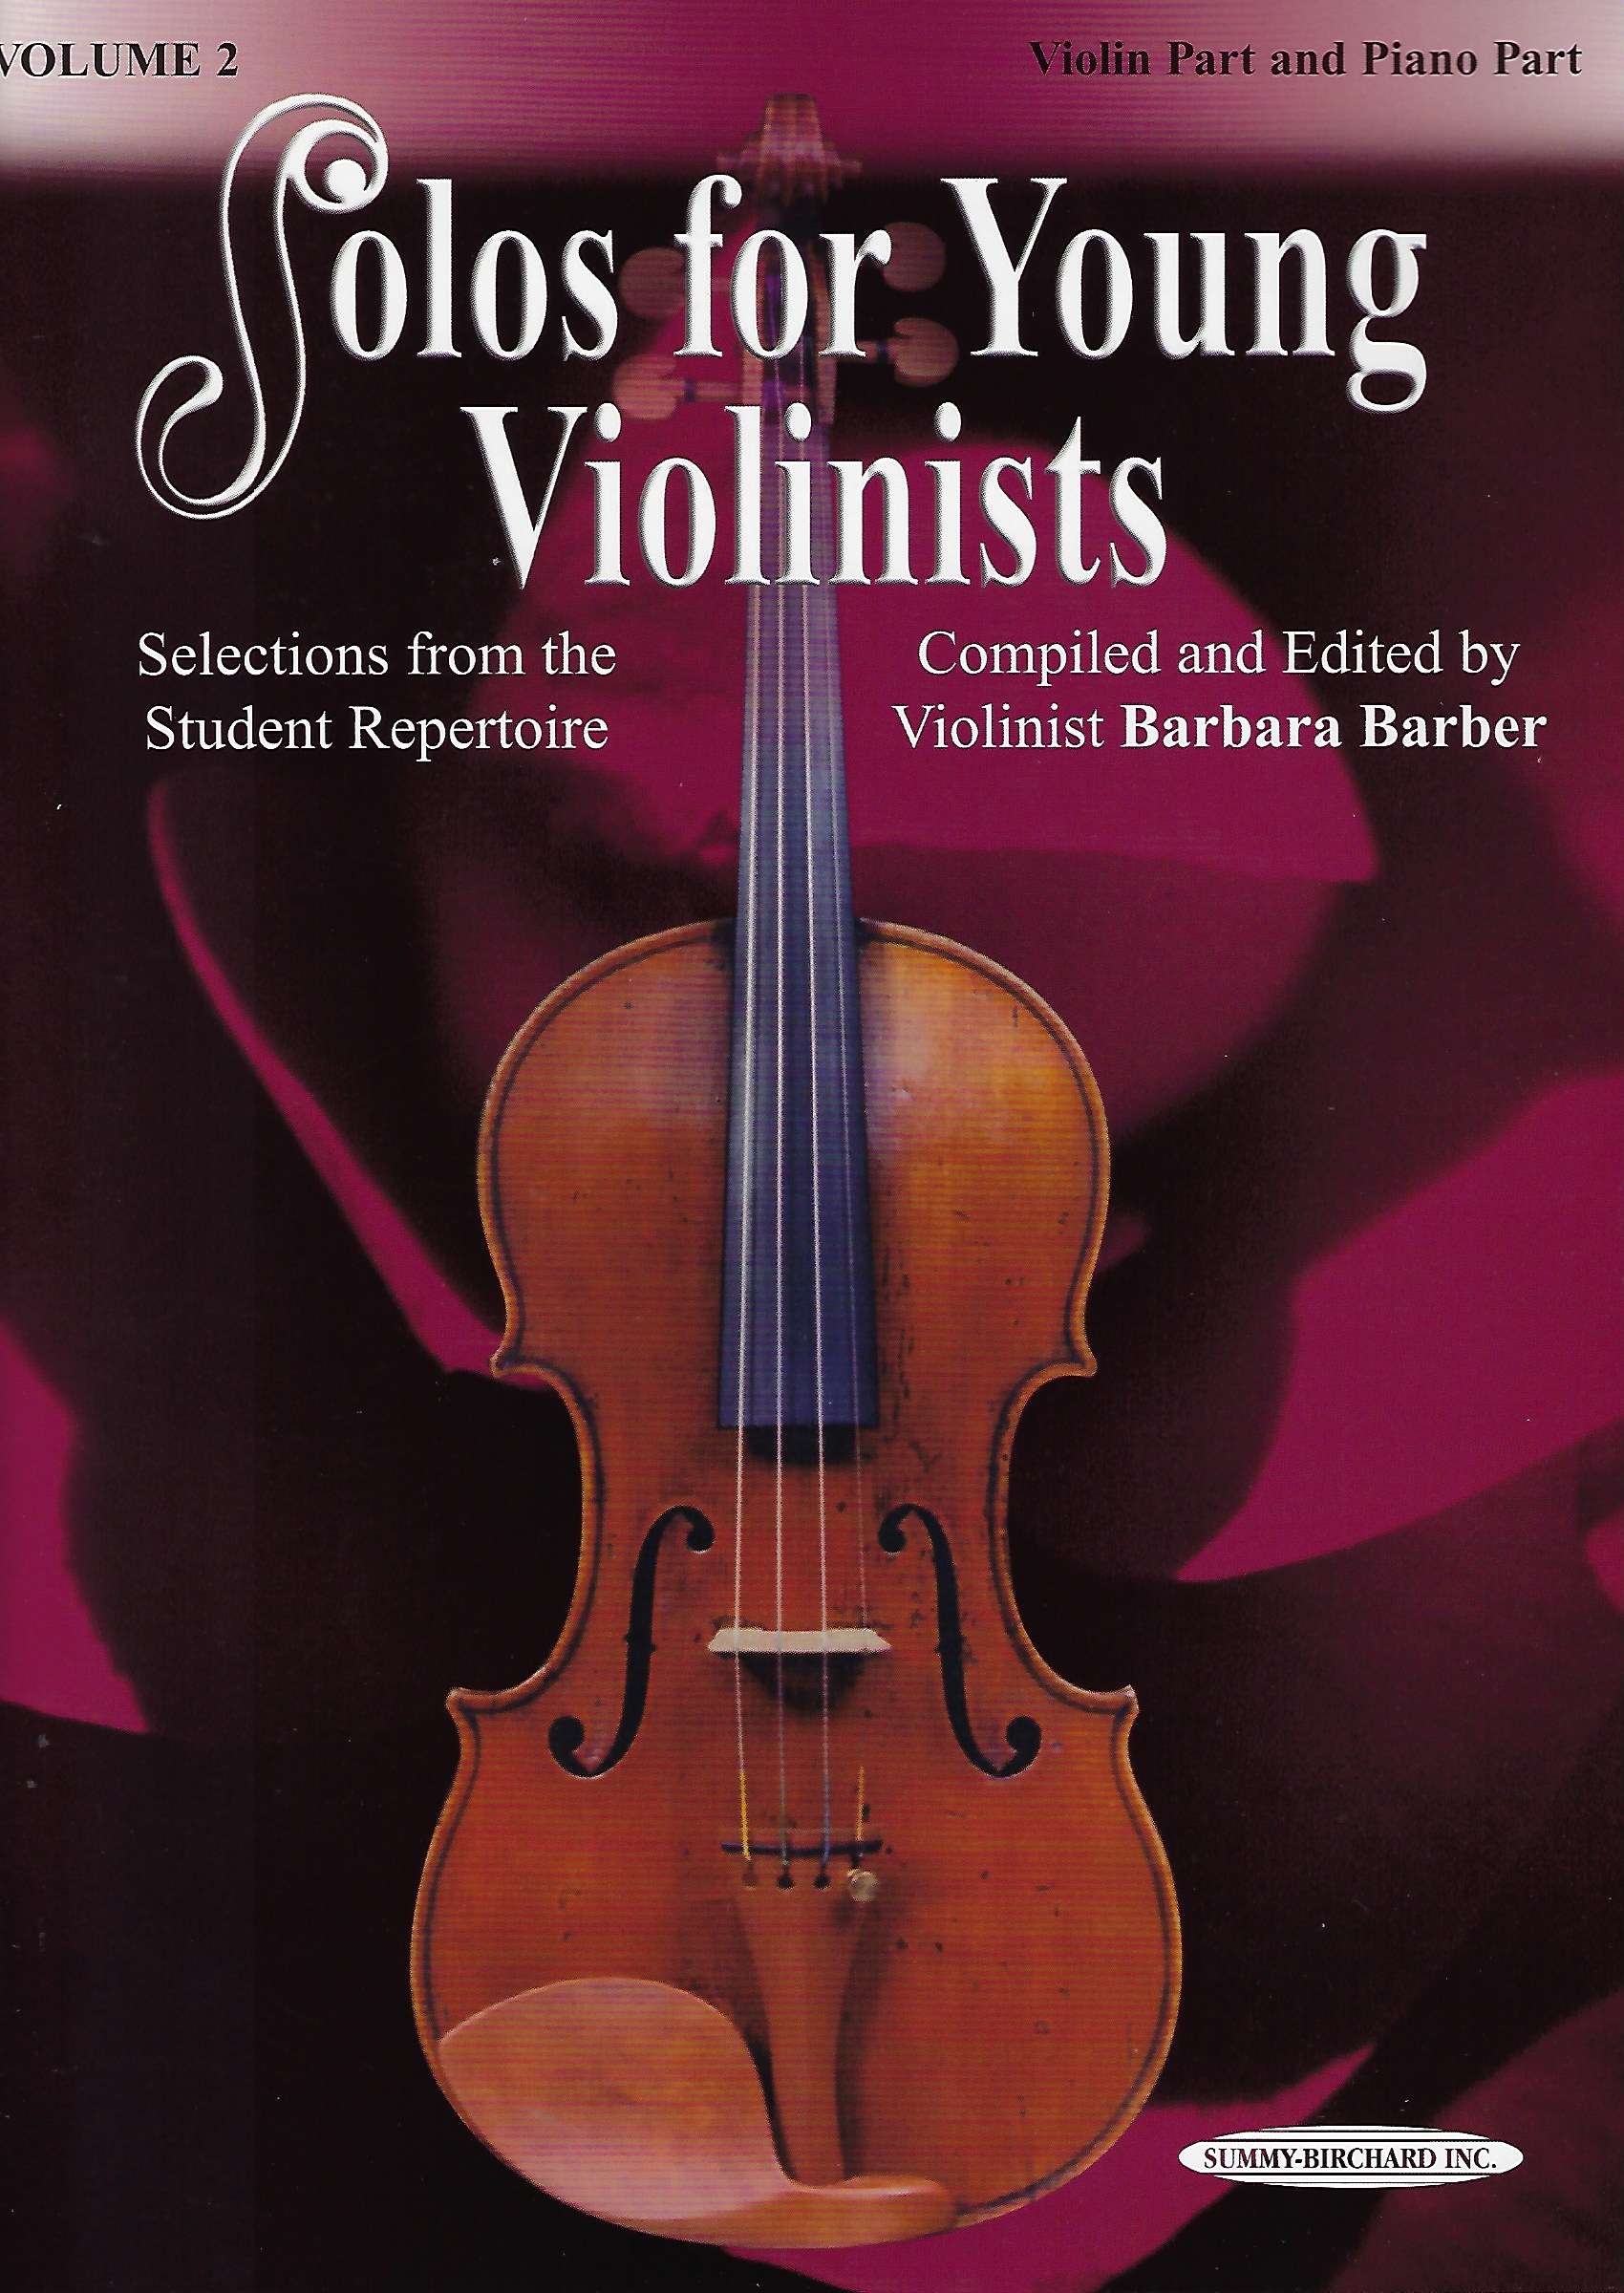 Solos for Young Violinists vol. 2